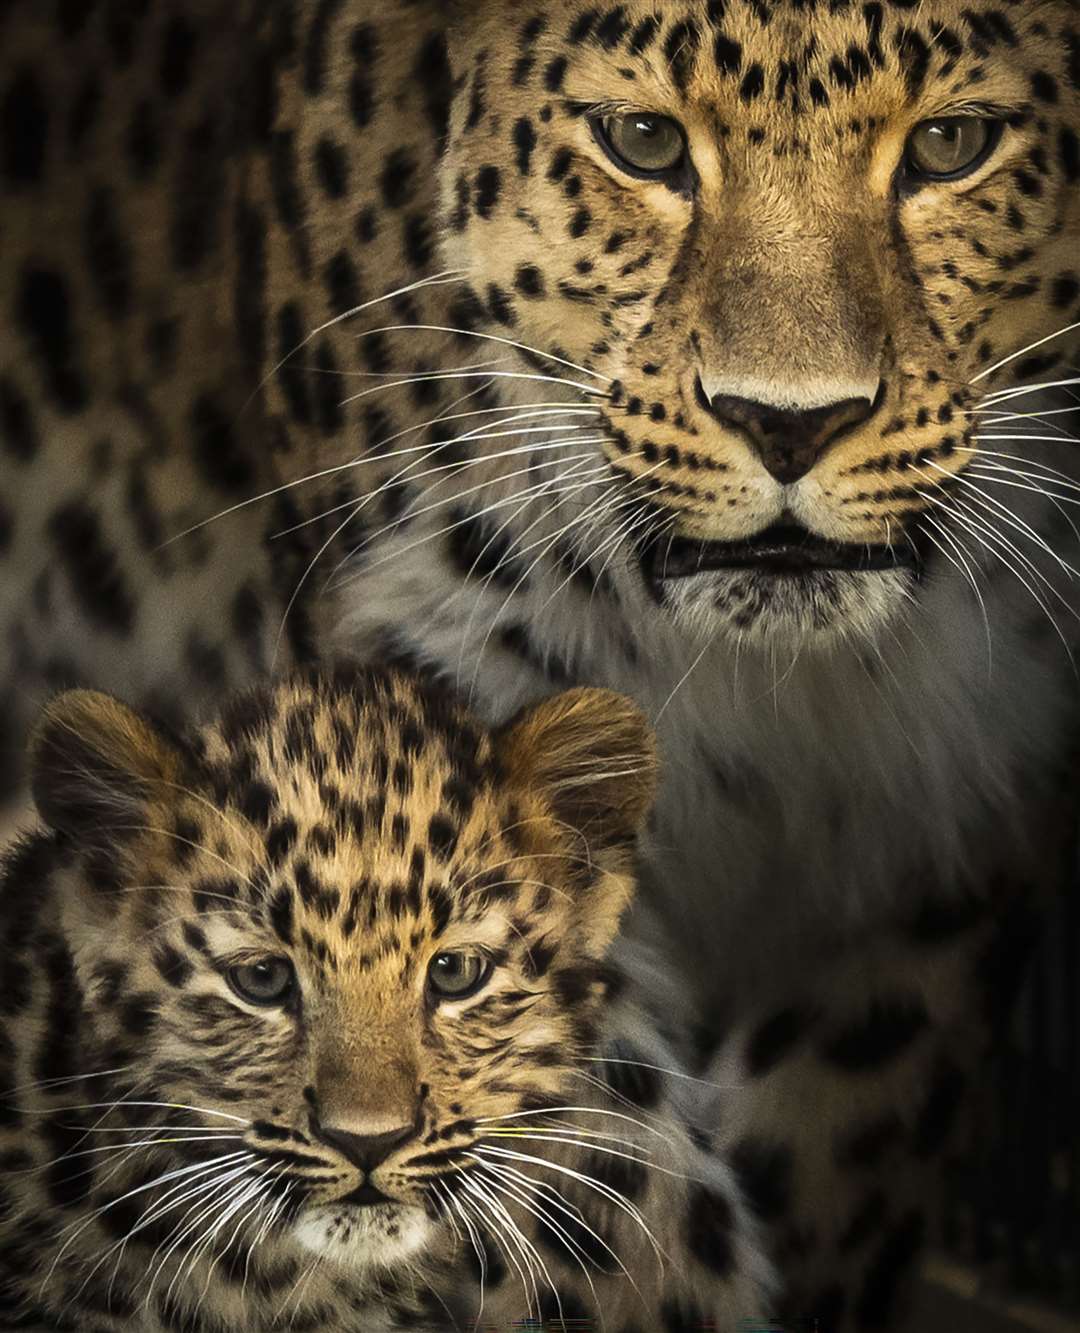 The only surviving critically endangered Amur leopard cub born in Europe this year, along with its mother Kristen, takes its first steps into its reserve at the Yorkshire Wildlife Park in Doncaster (Danny Lawson/PA)